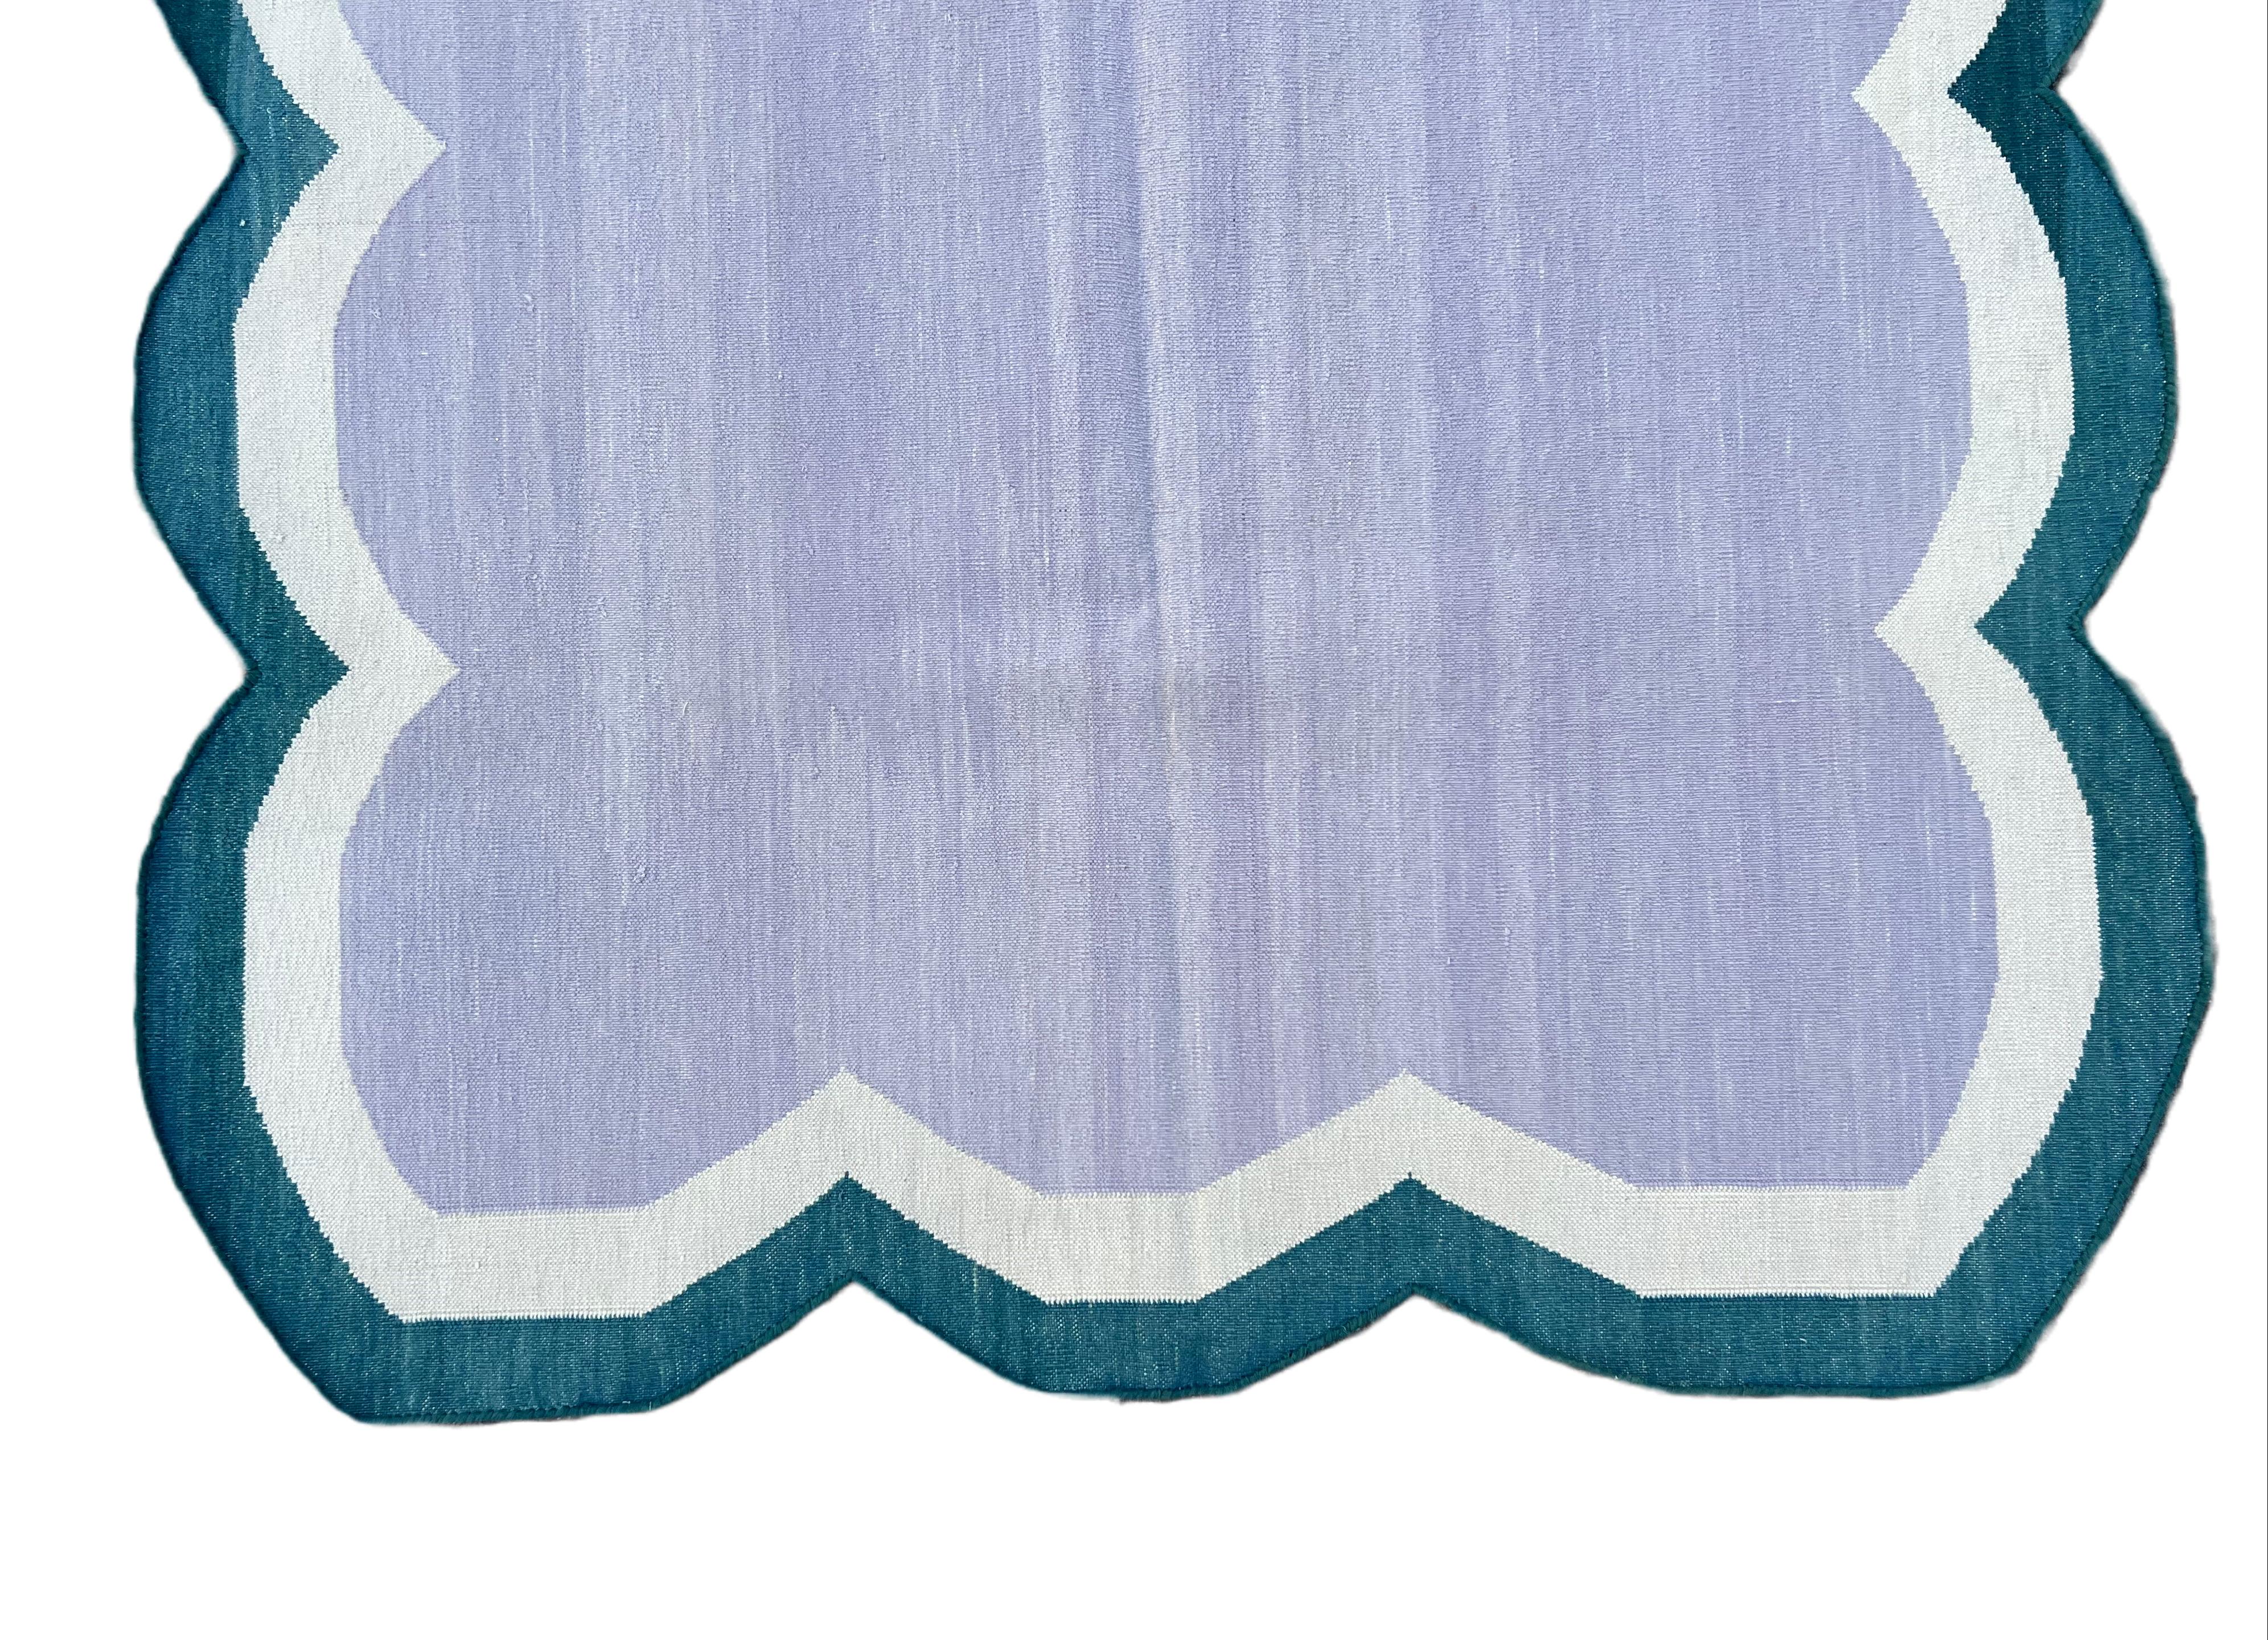 Hand-Woven Handmade Cotton Area Flat Weave Rug, 3x5 Lavender And Blue Scallop Kilim Dhurrie For Sale